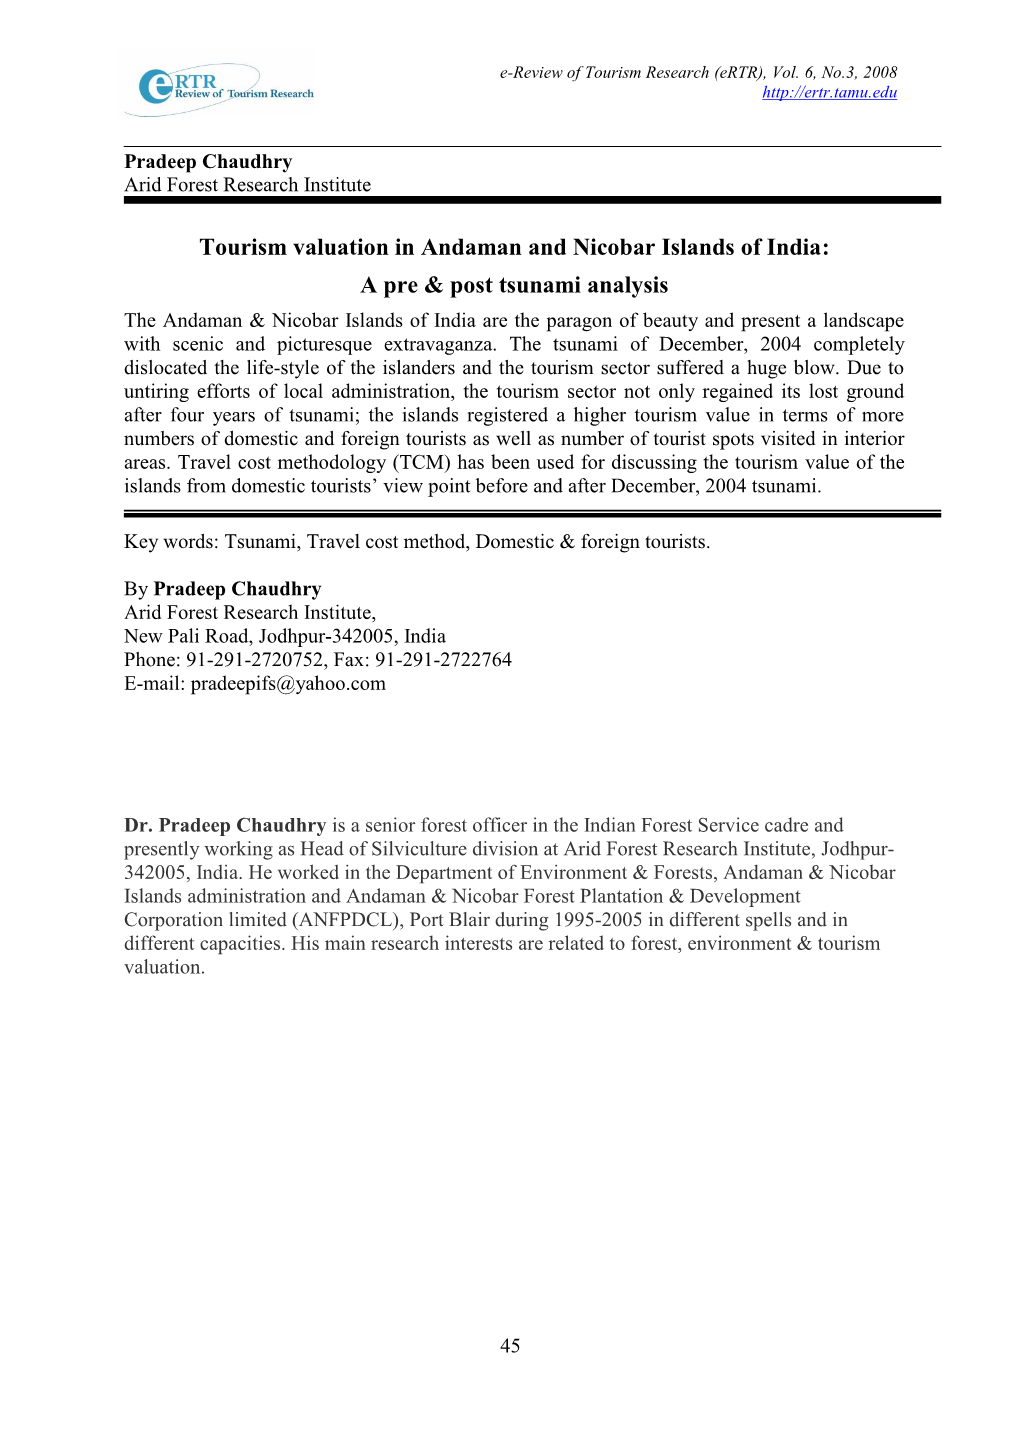 Tourism Valuation in Andaman and Nicobar Islands of India: a Pre